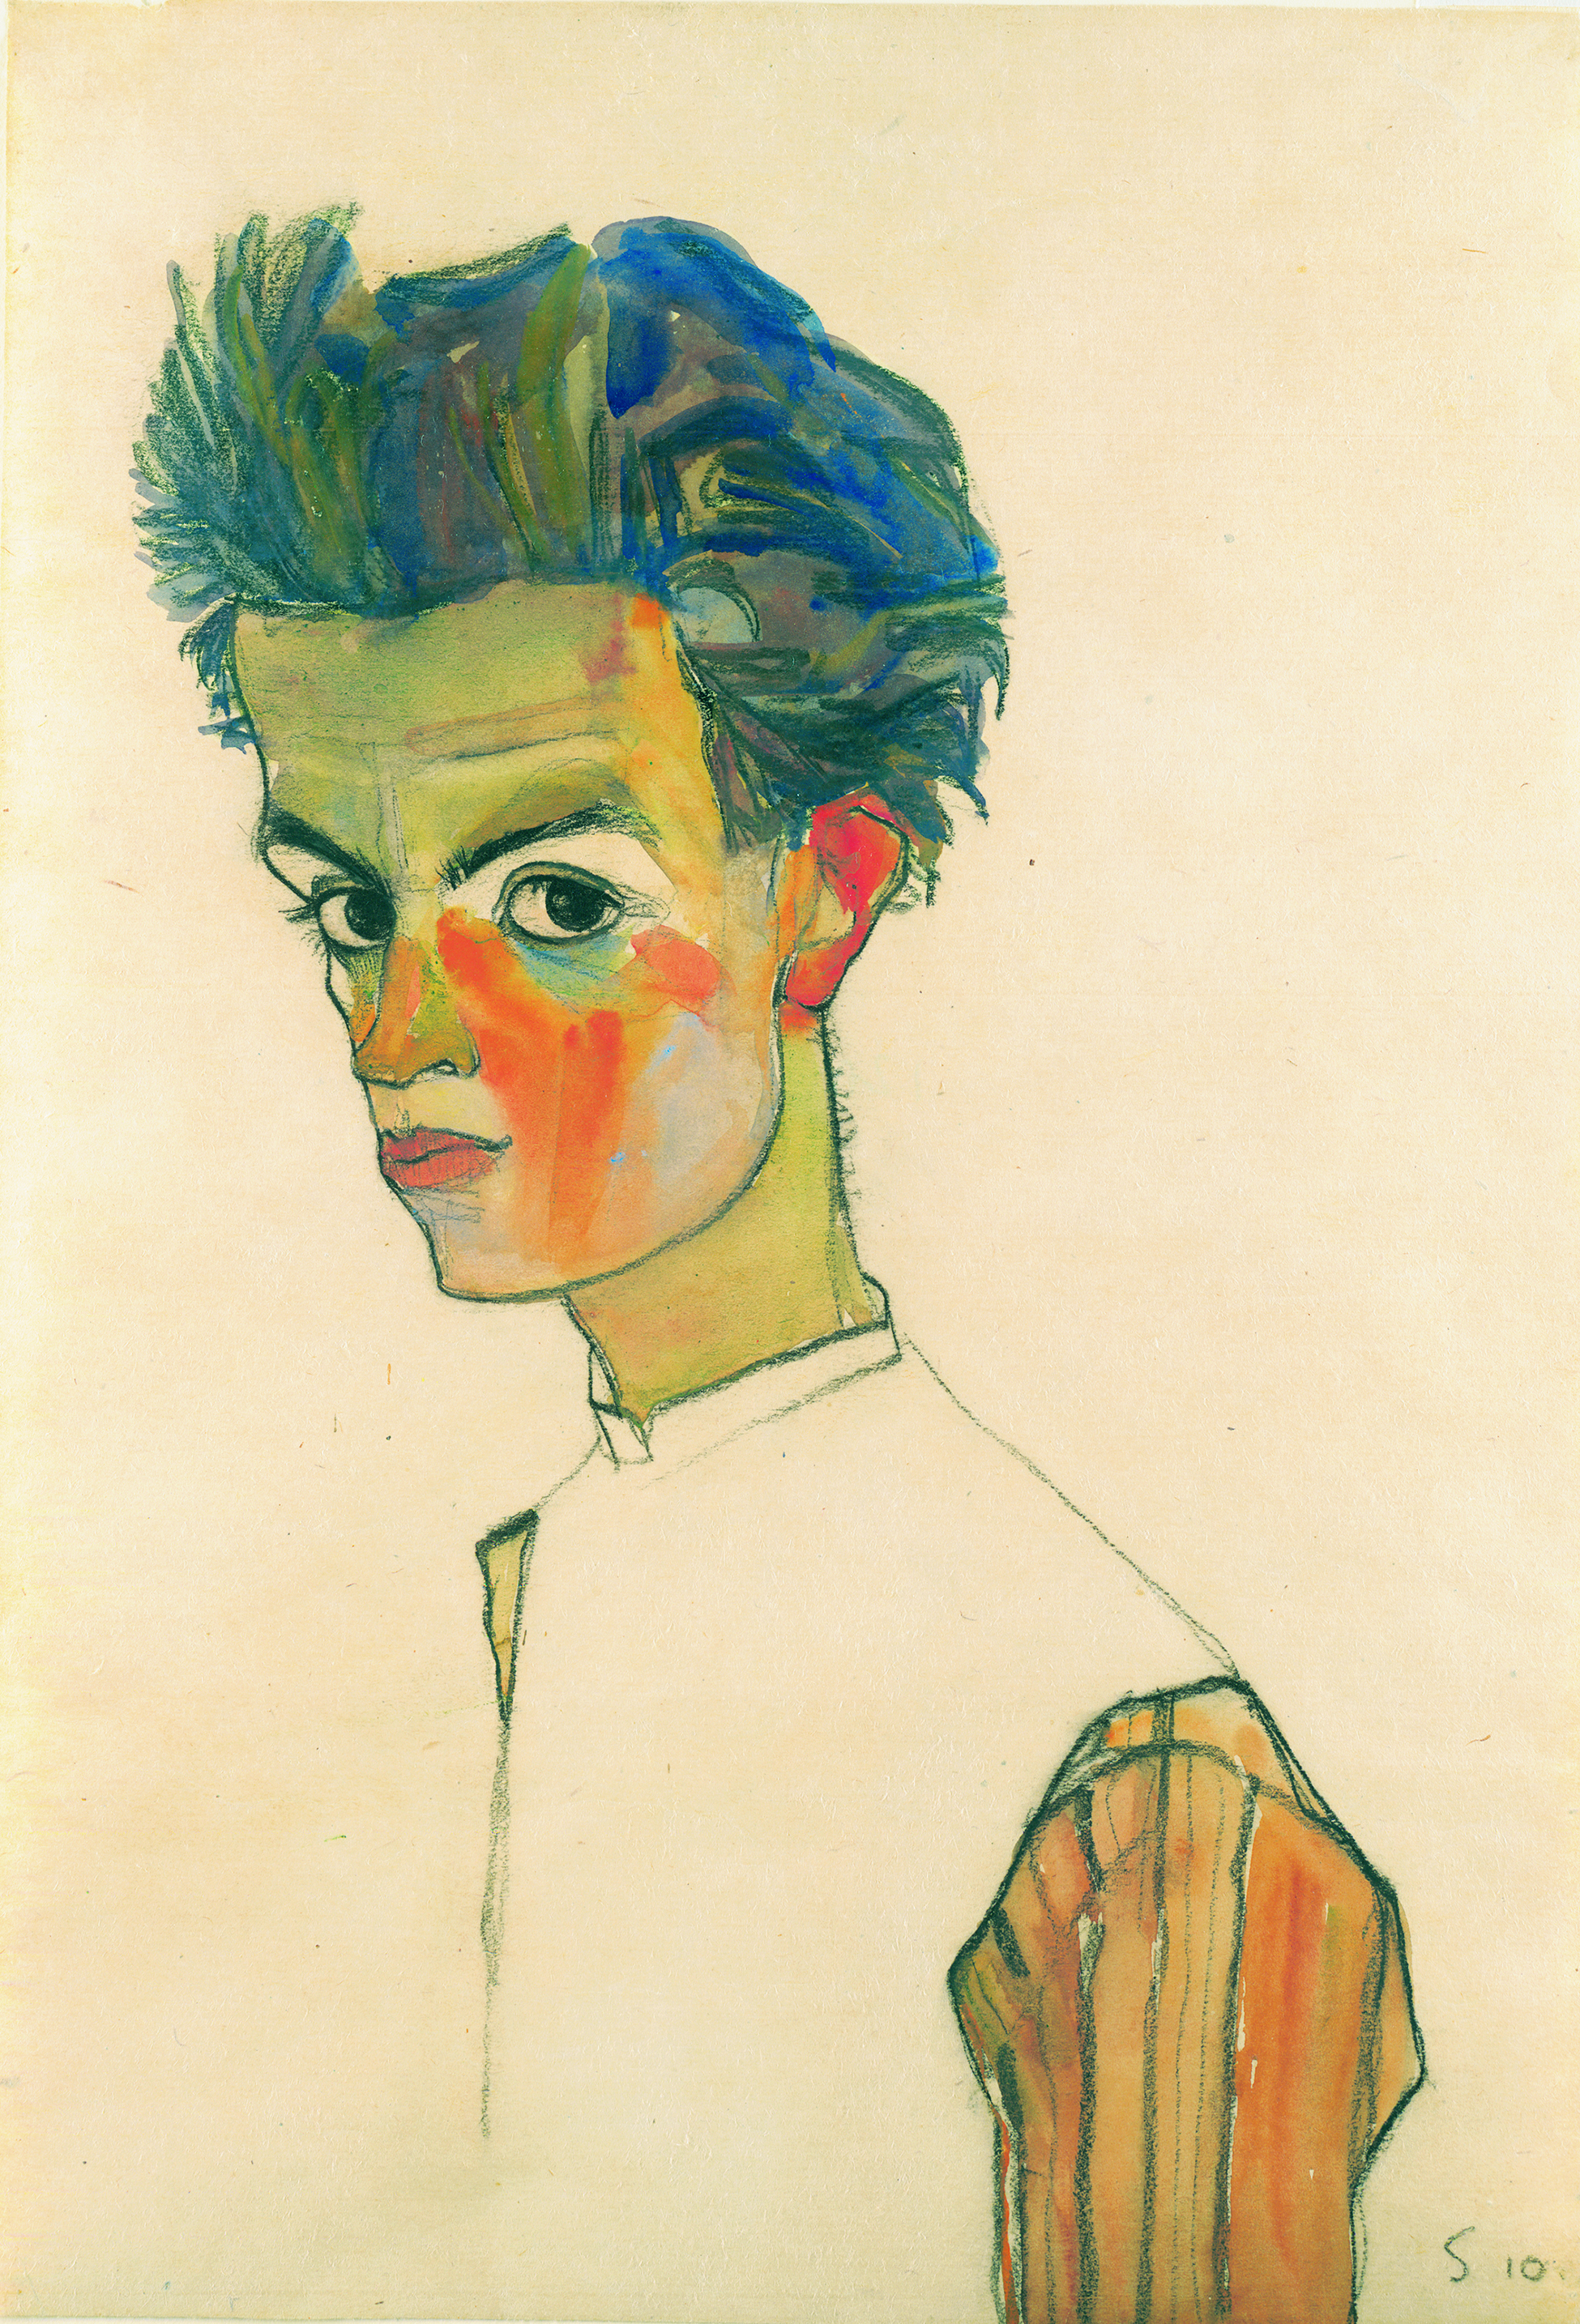 Self-Portrait with Striped Shirt by Egon Schiele - 1910 Leopold Museum